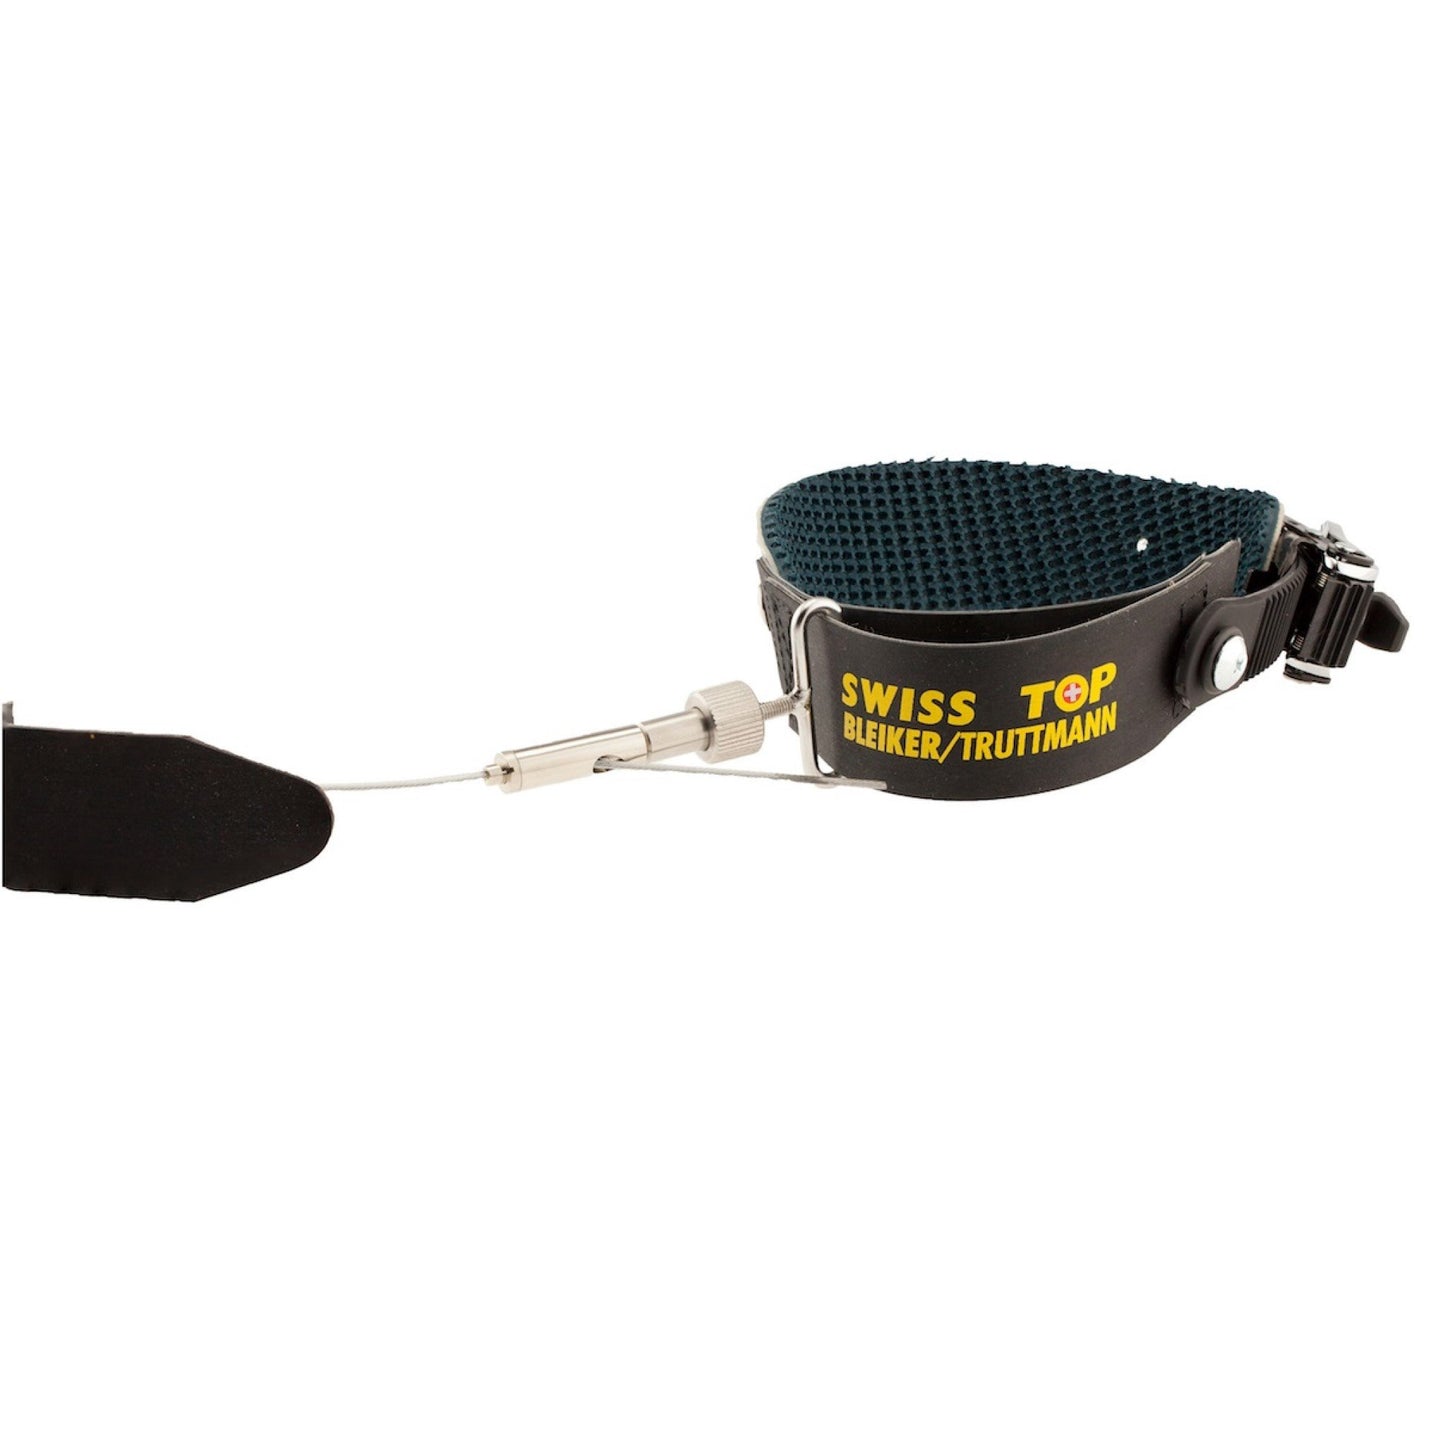 Truttmann Swiss Top Sling (with rope)